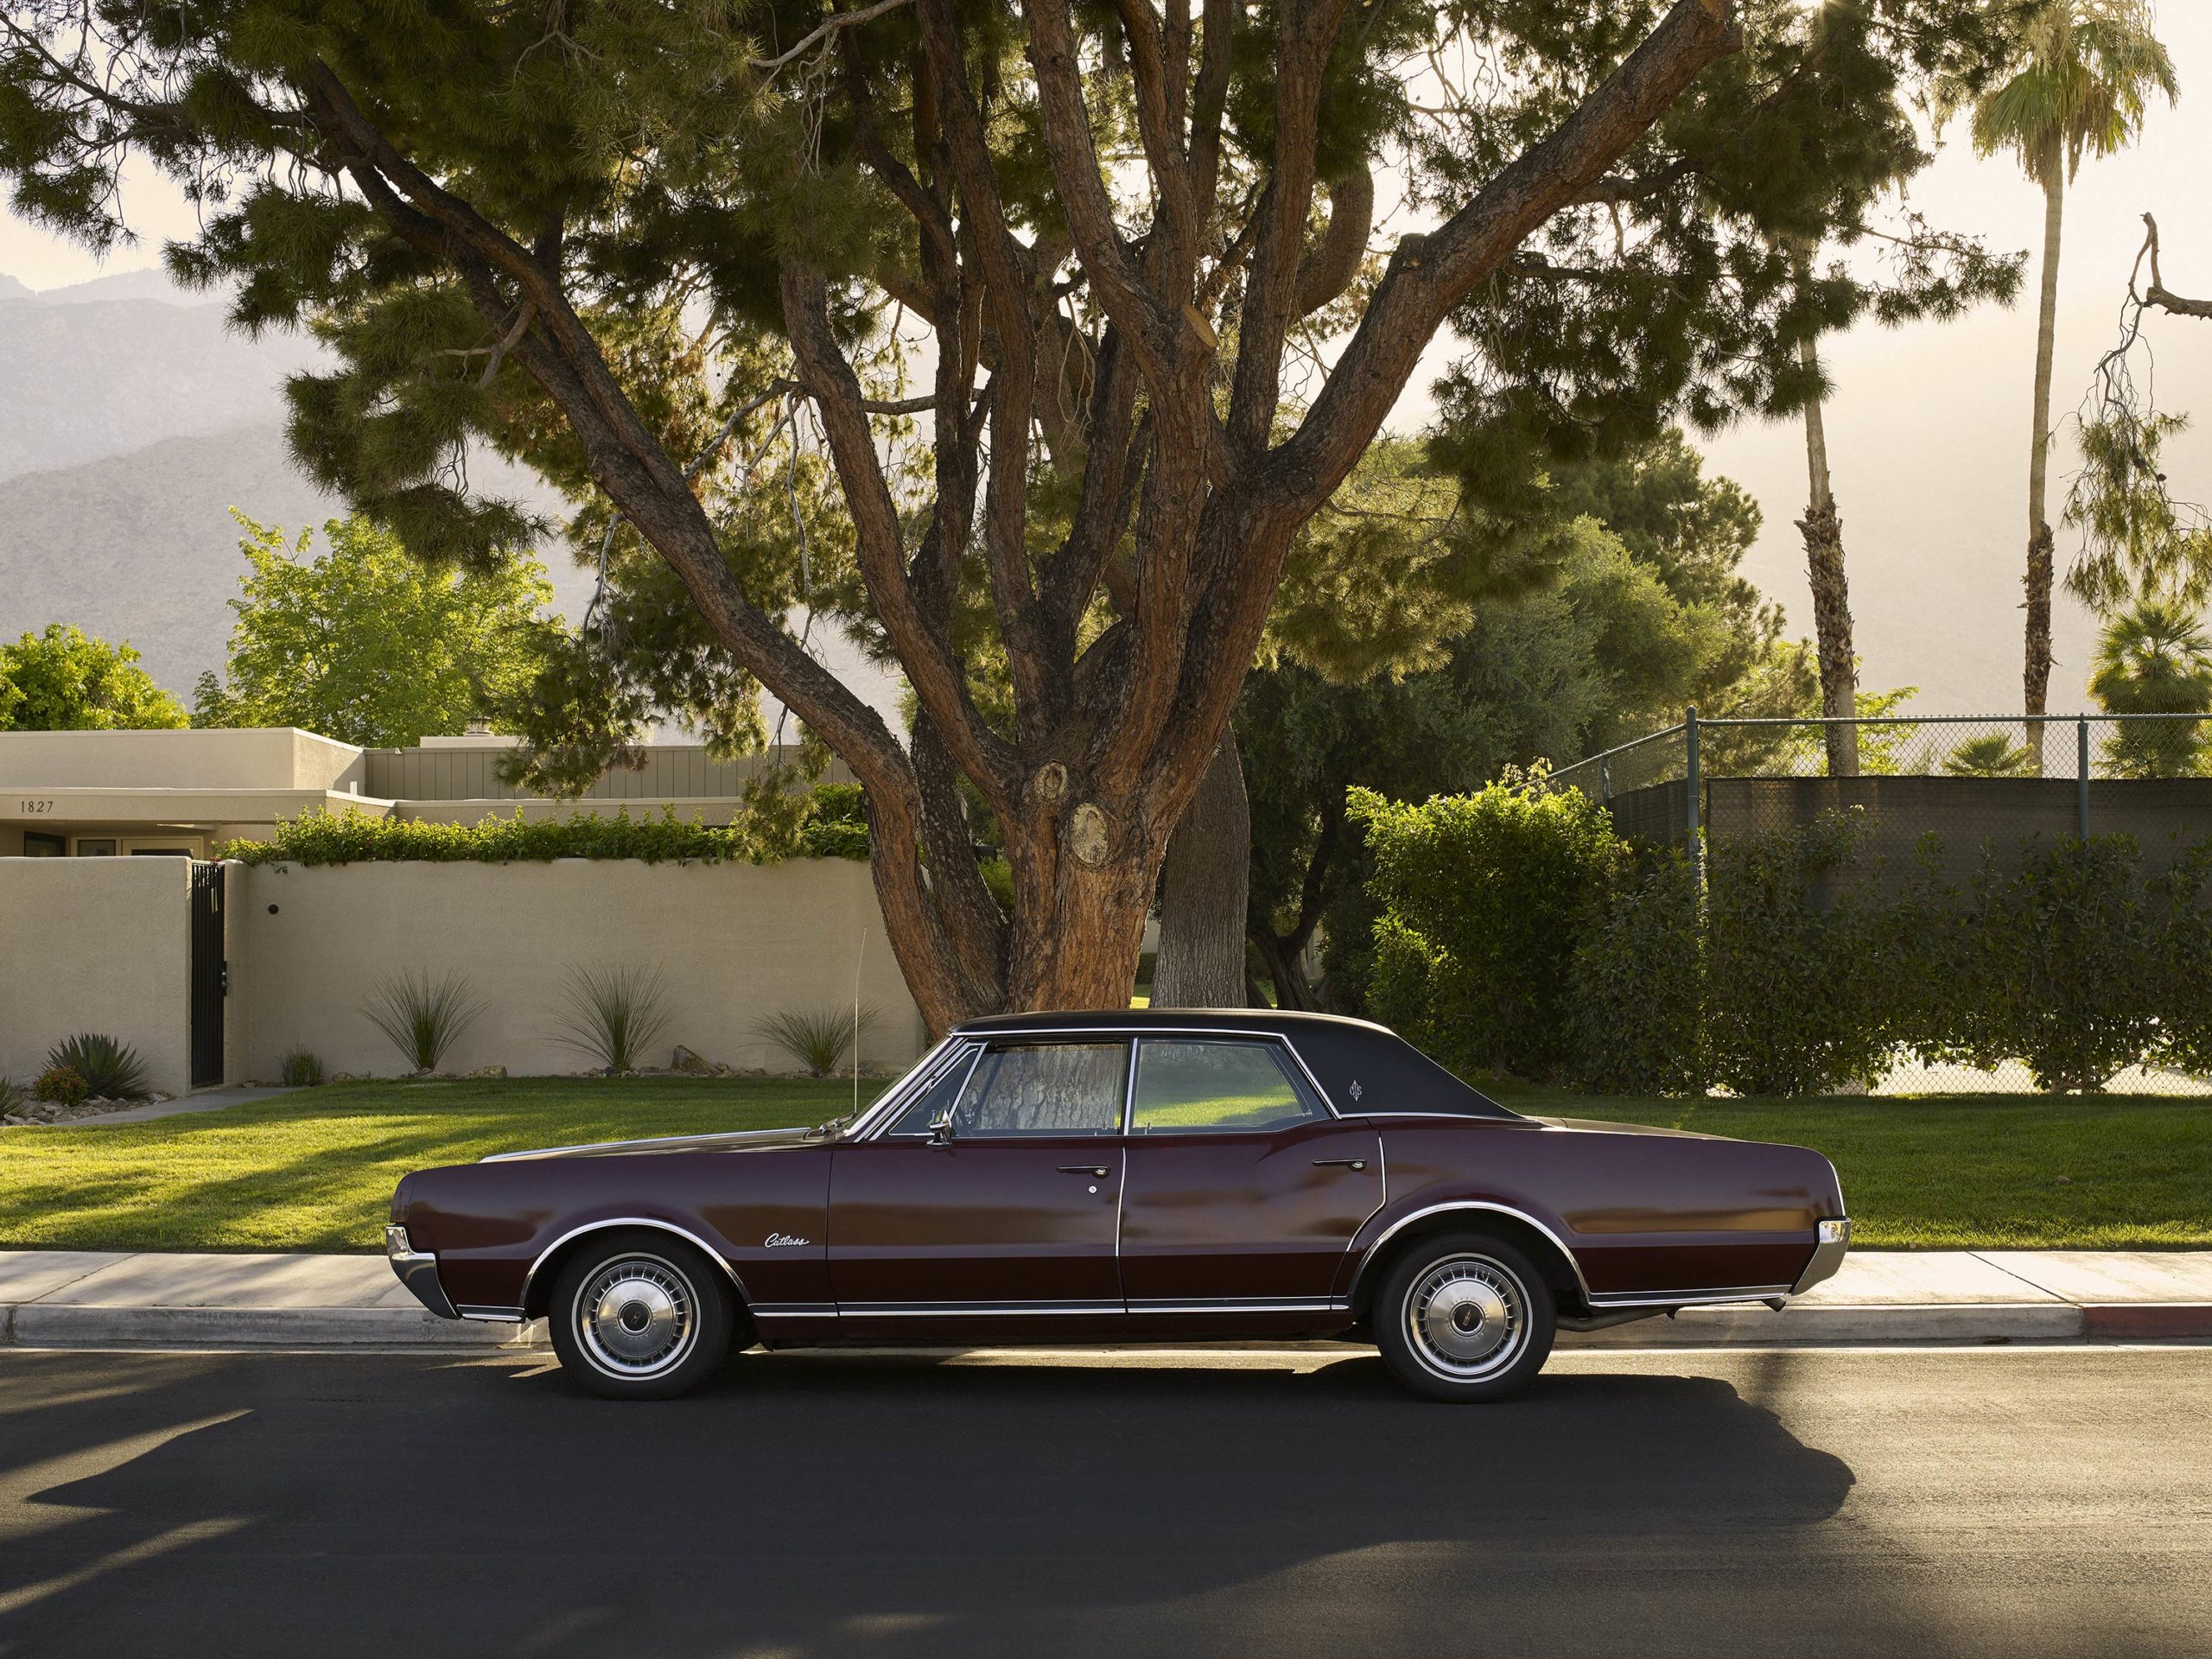 Oldsmobile - I Heart Palm Springs Collection - Fine Art Photography by Toby Dixon